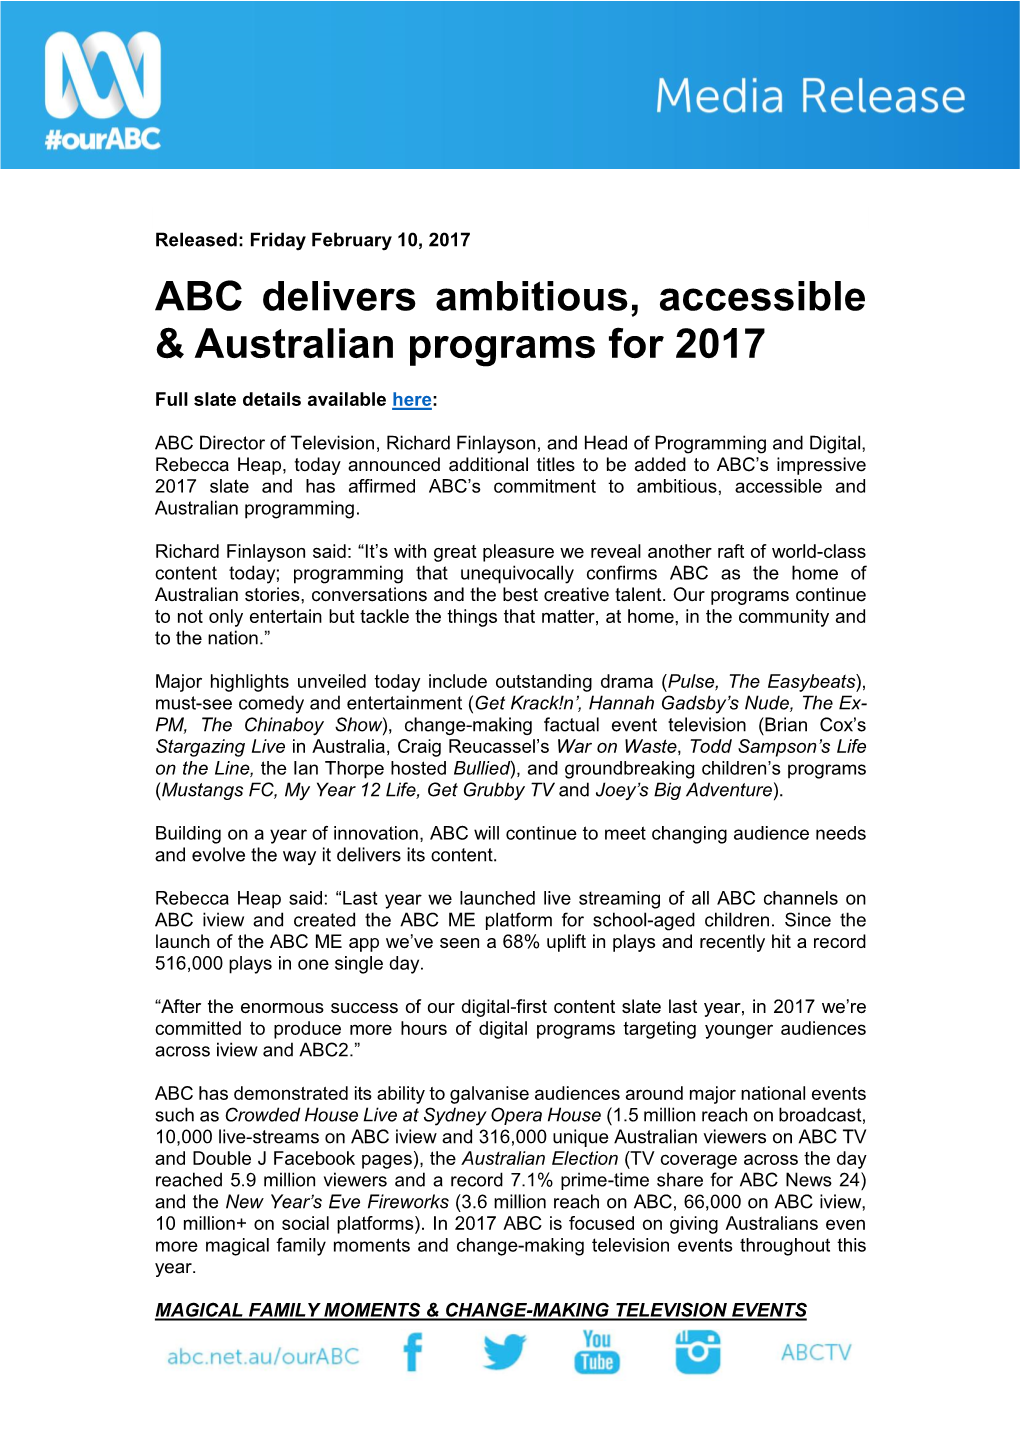 ABC Delivers Ambitious, Accessible & Australian Programs for 2017